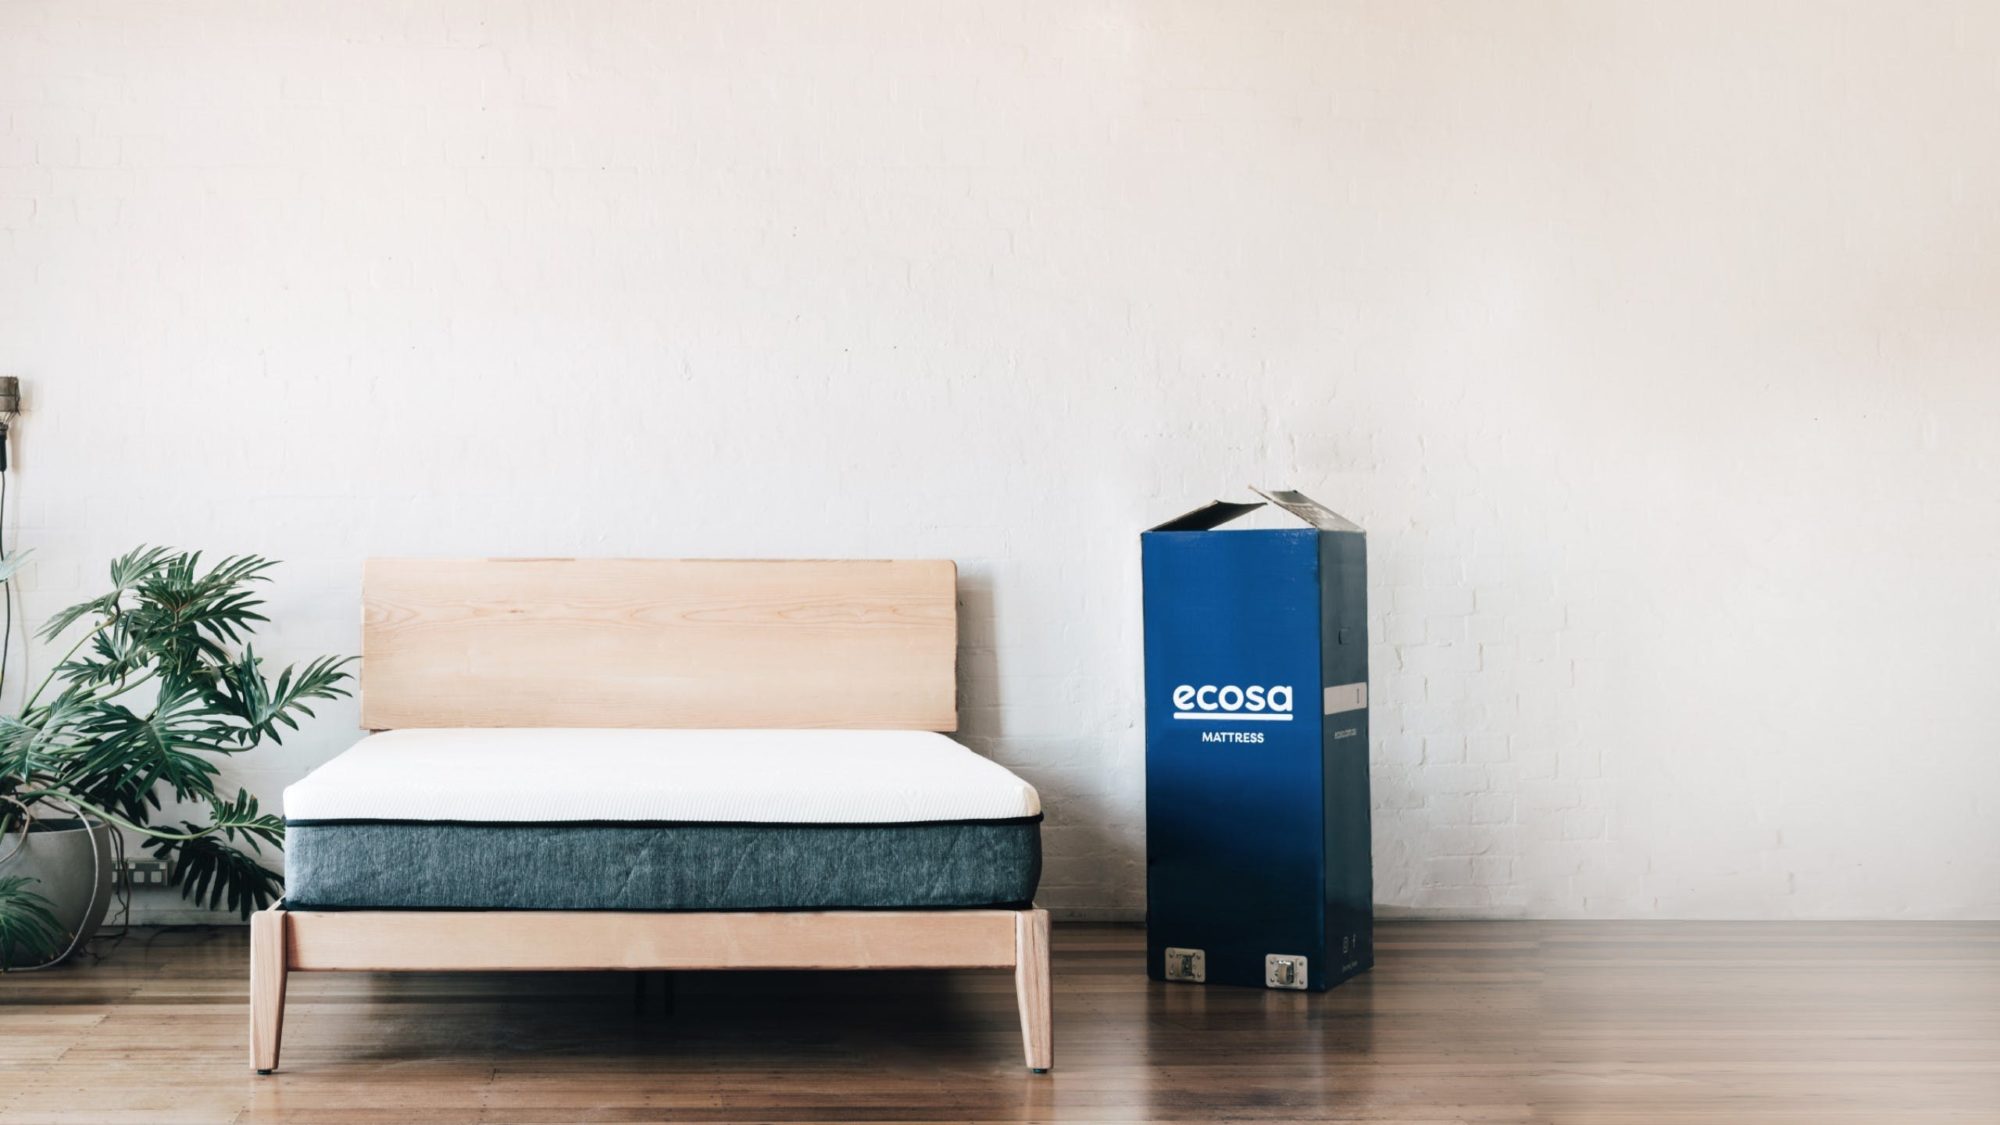 Ecosa make one of the best mattress in a box products